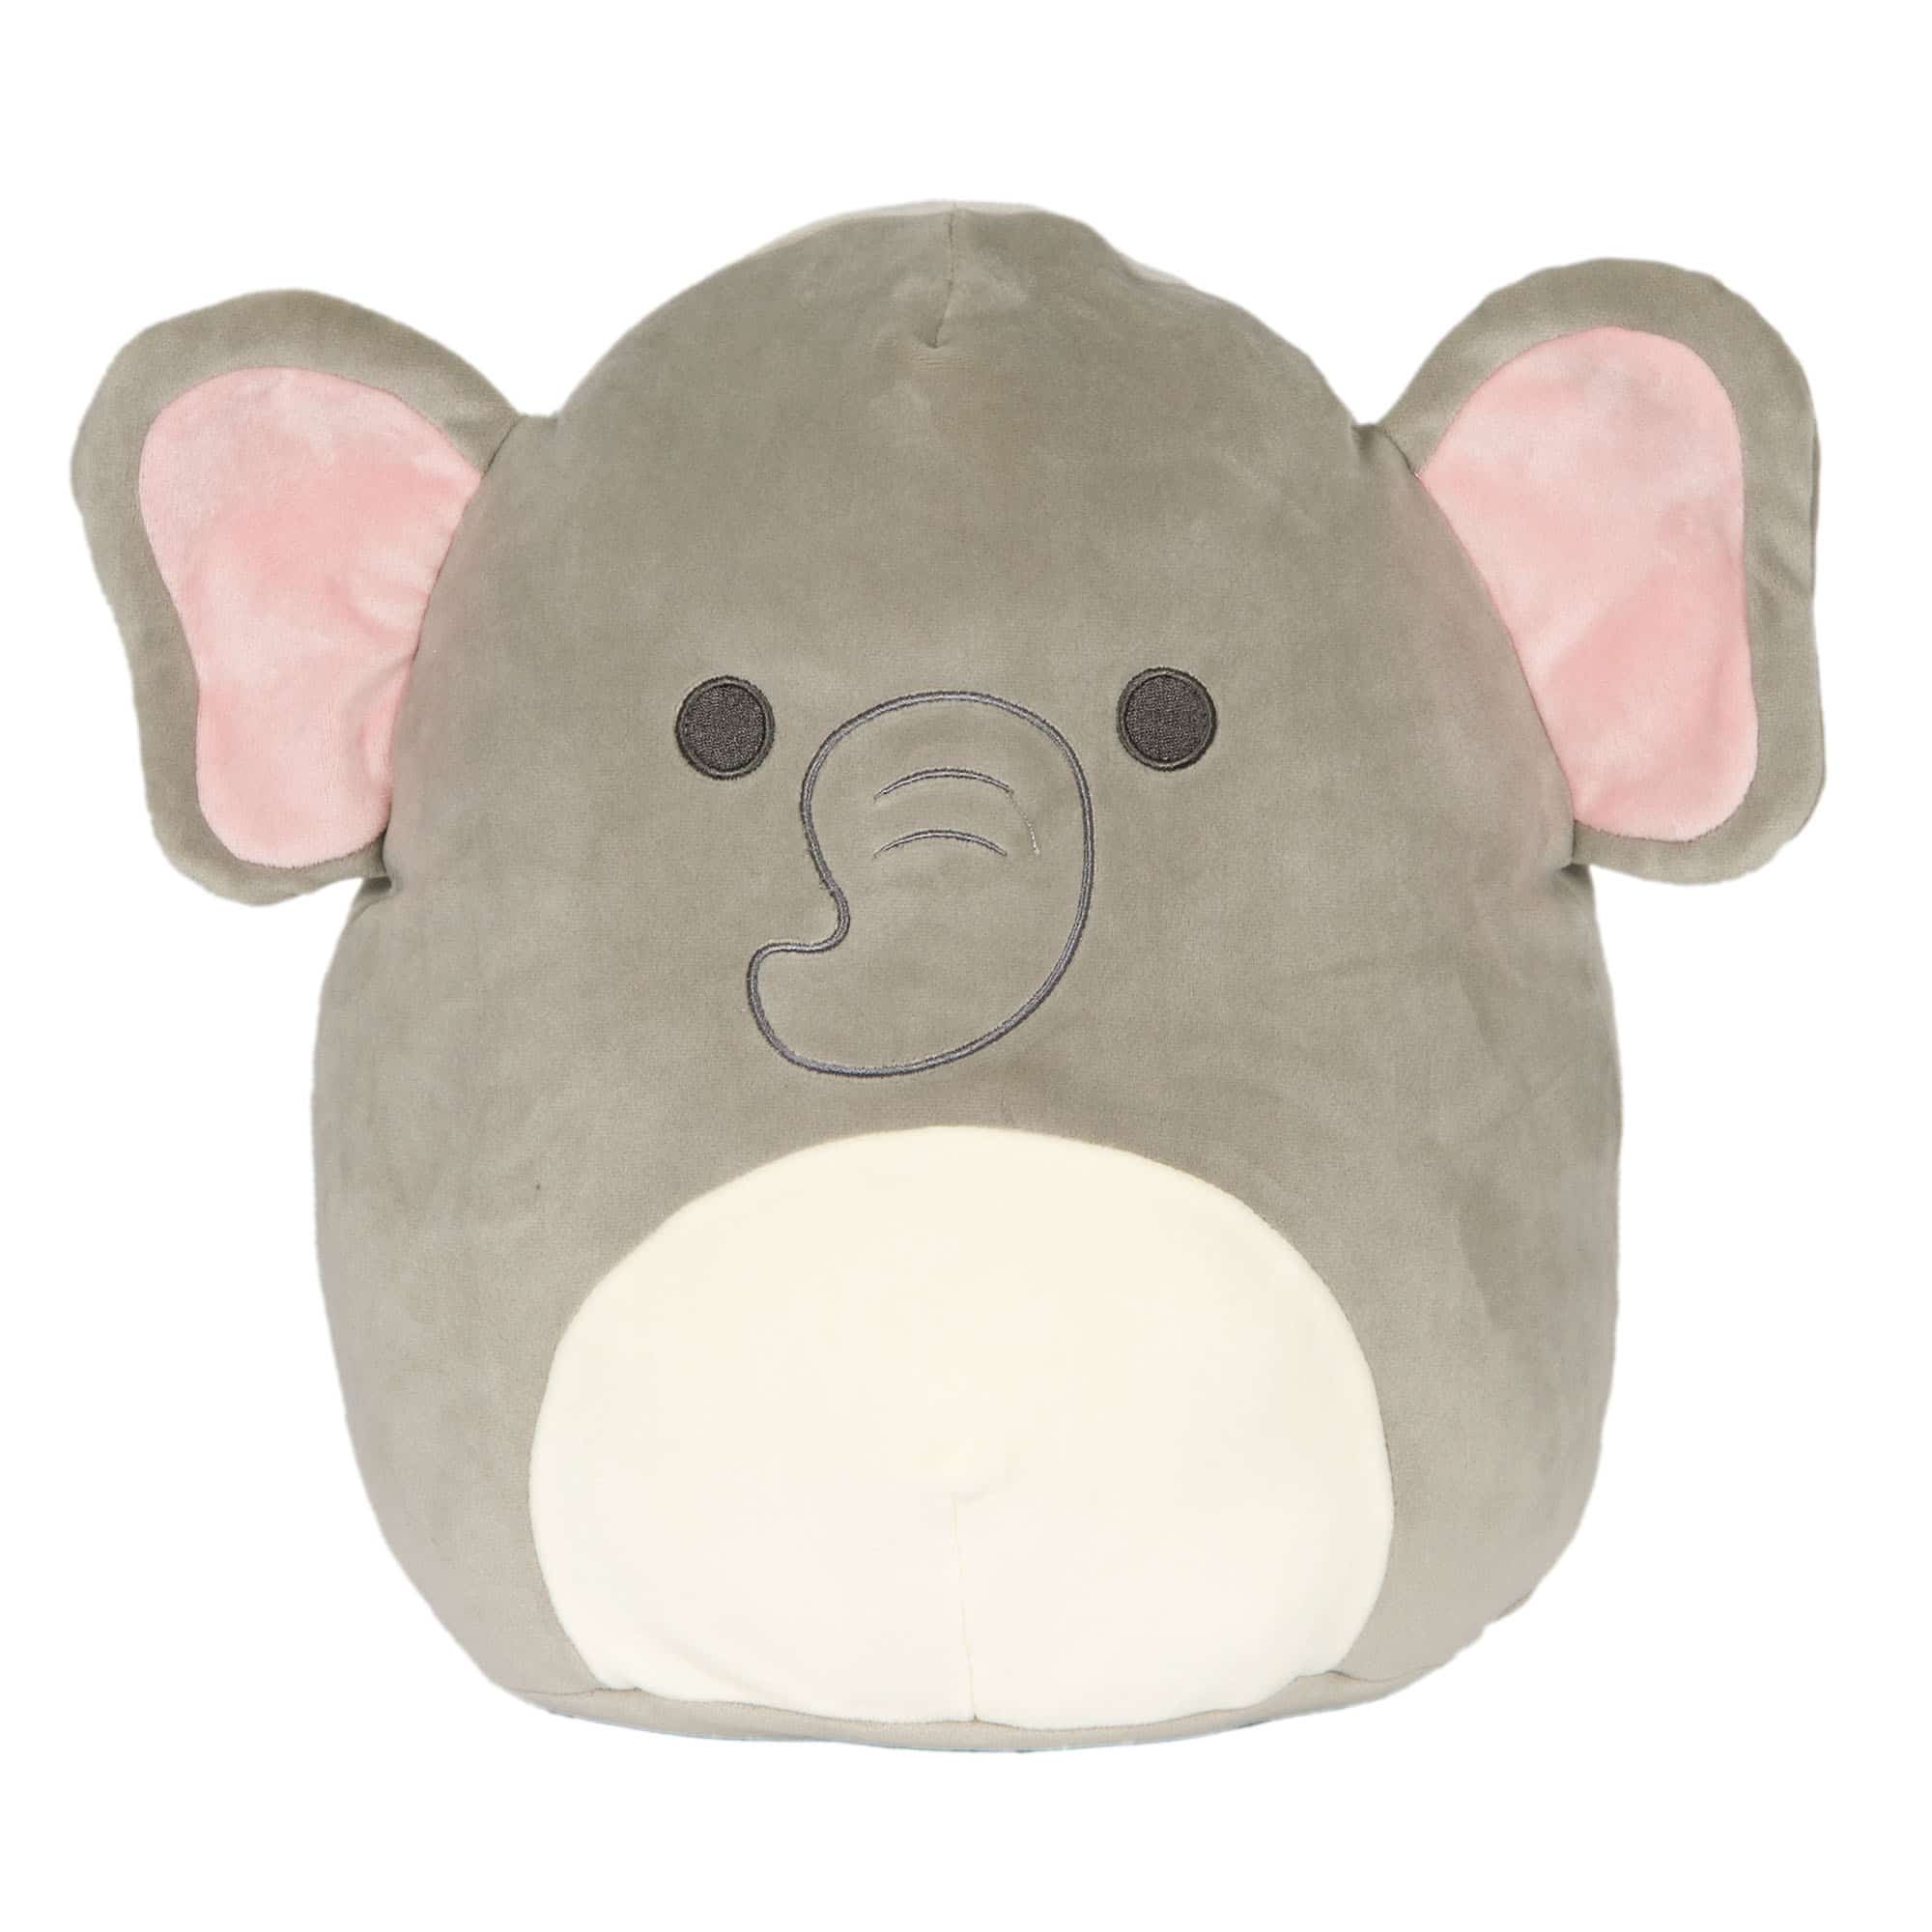 SQUISHMALLOW 08" Emma the Baby Elephant with Rattle Children's Plush Toy L2A13 